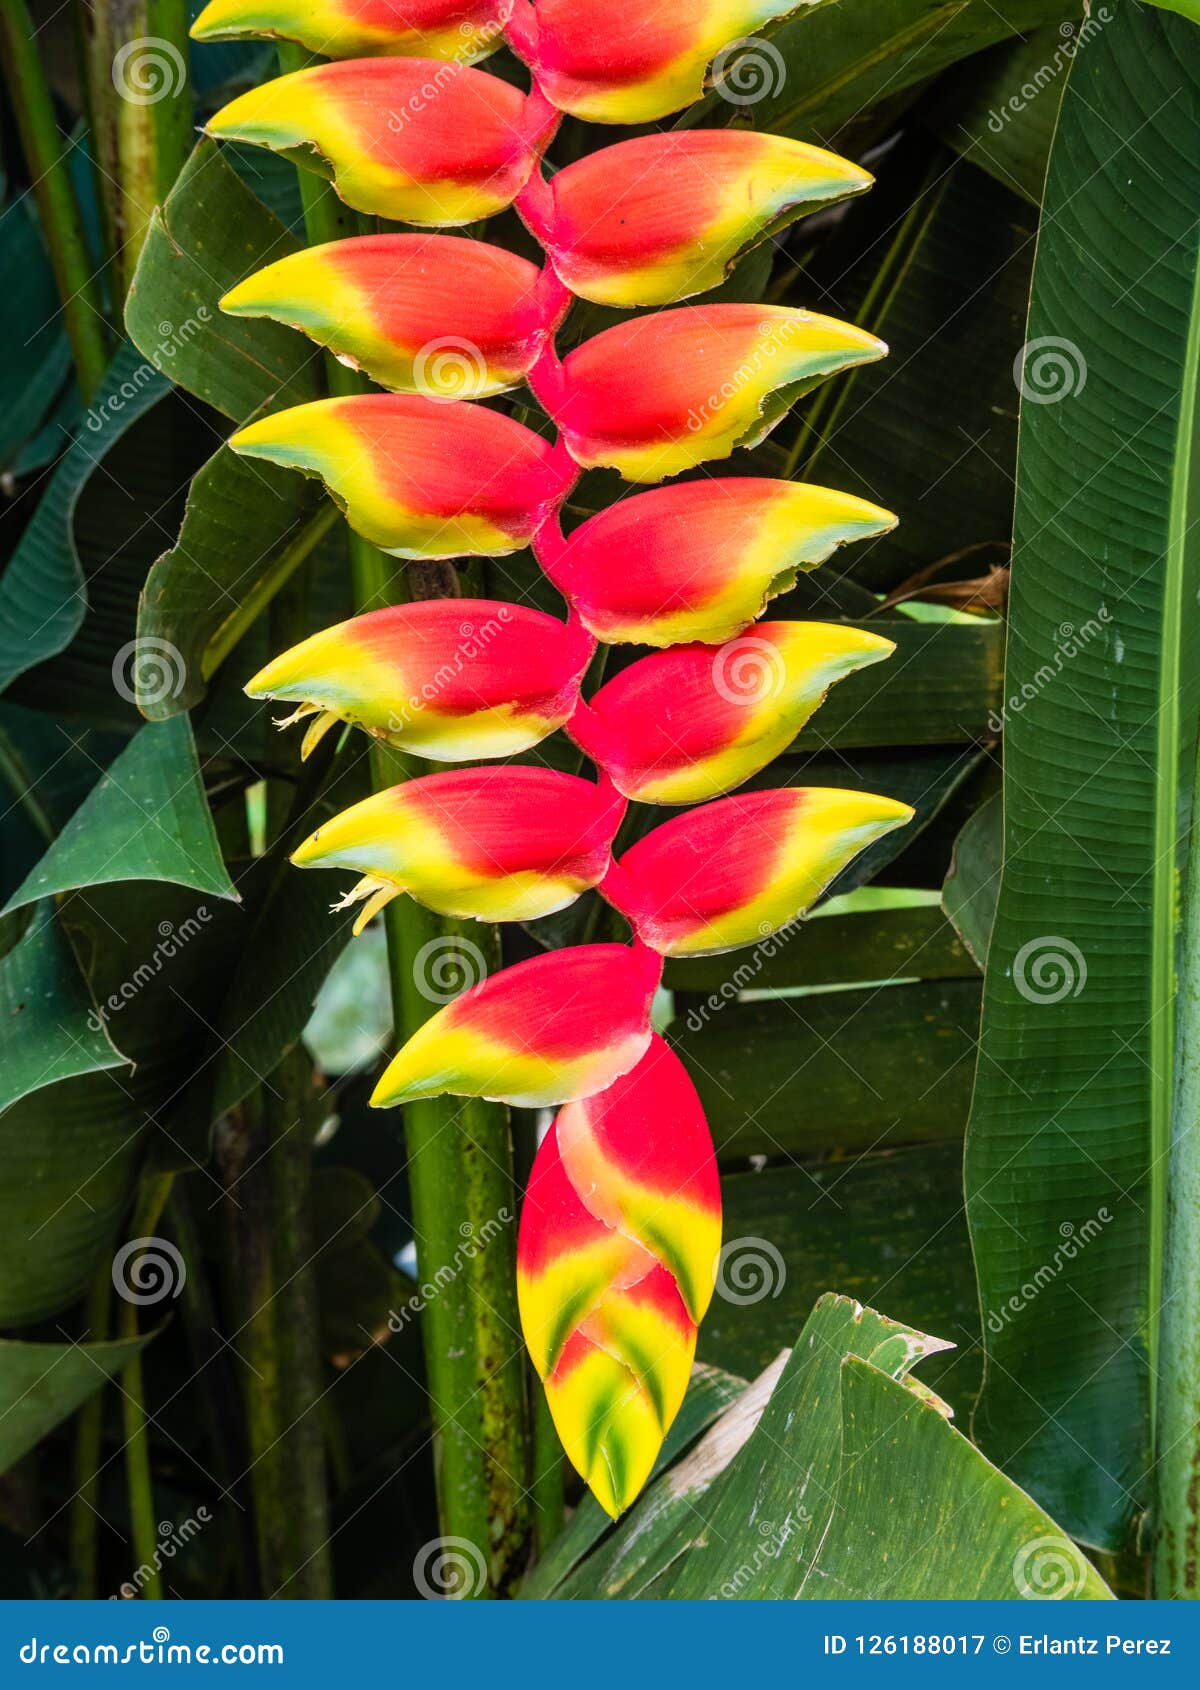 Red Tropical Heliconia Flower Blossom Stock Image - Image of tunari,  beauty: 126188017